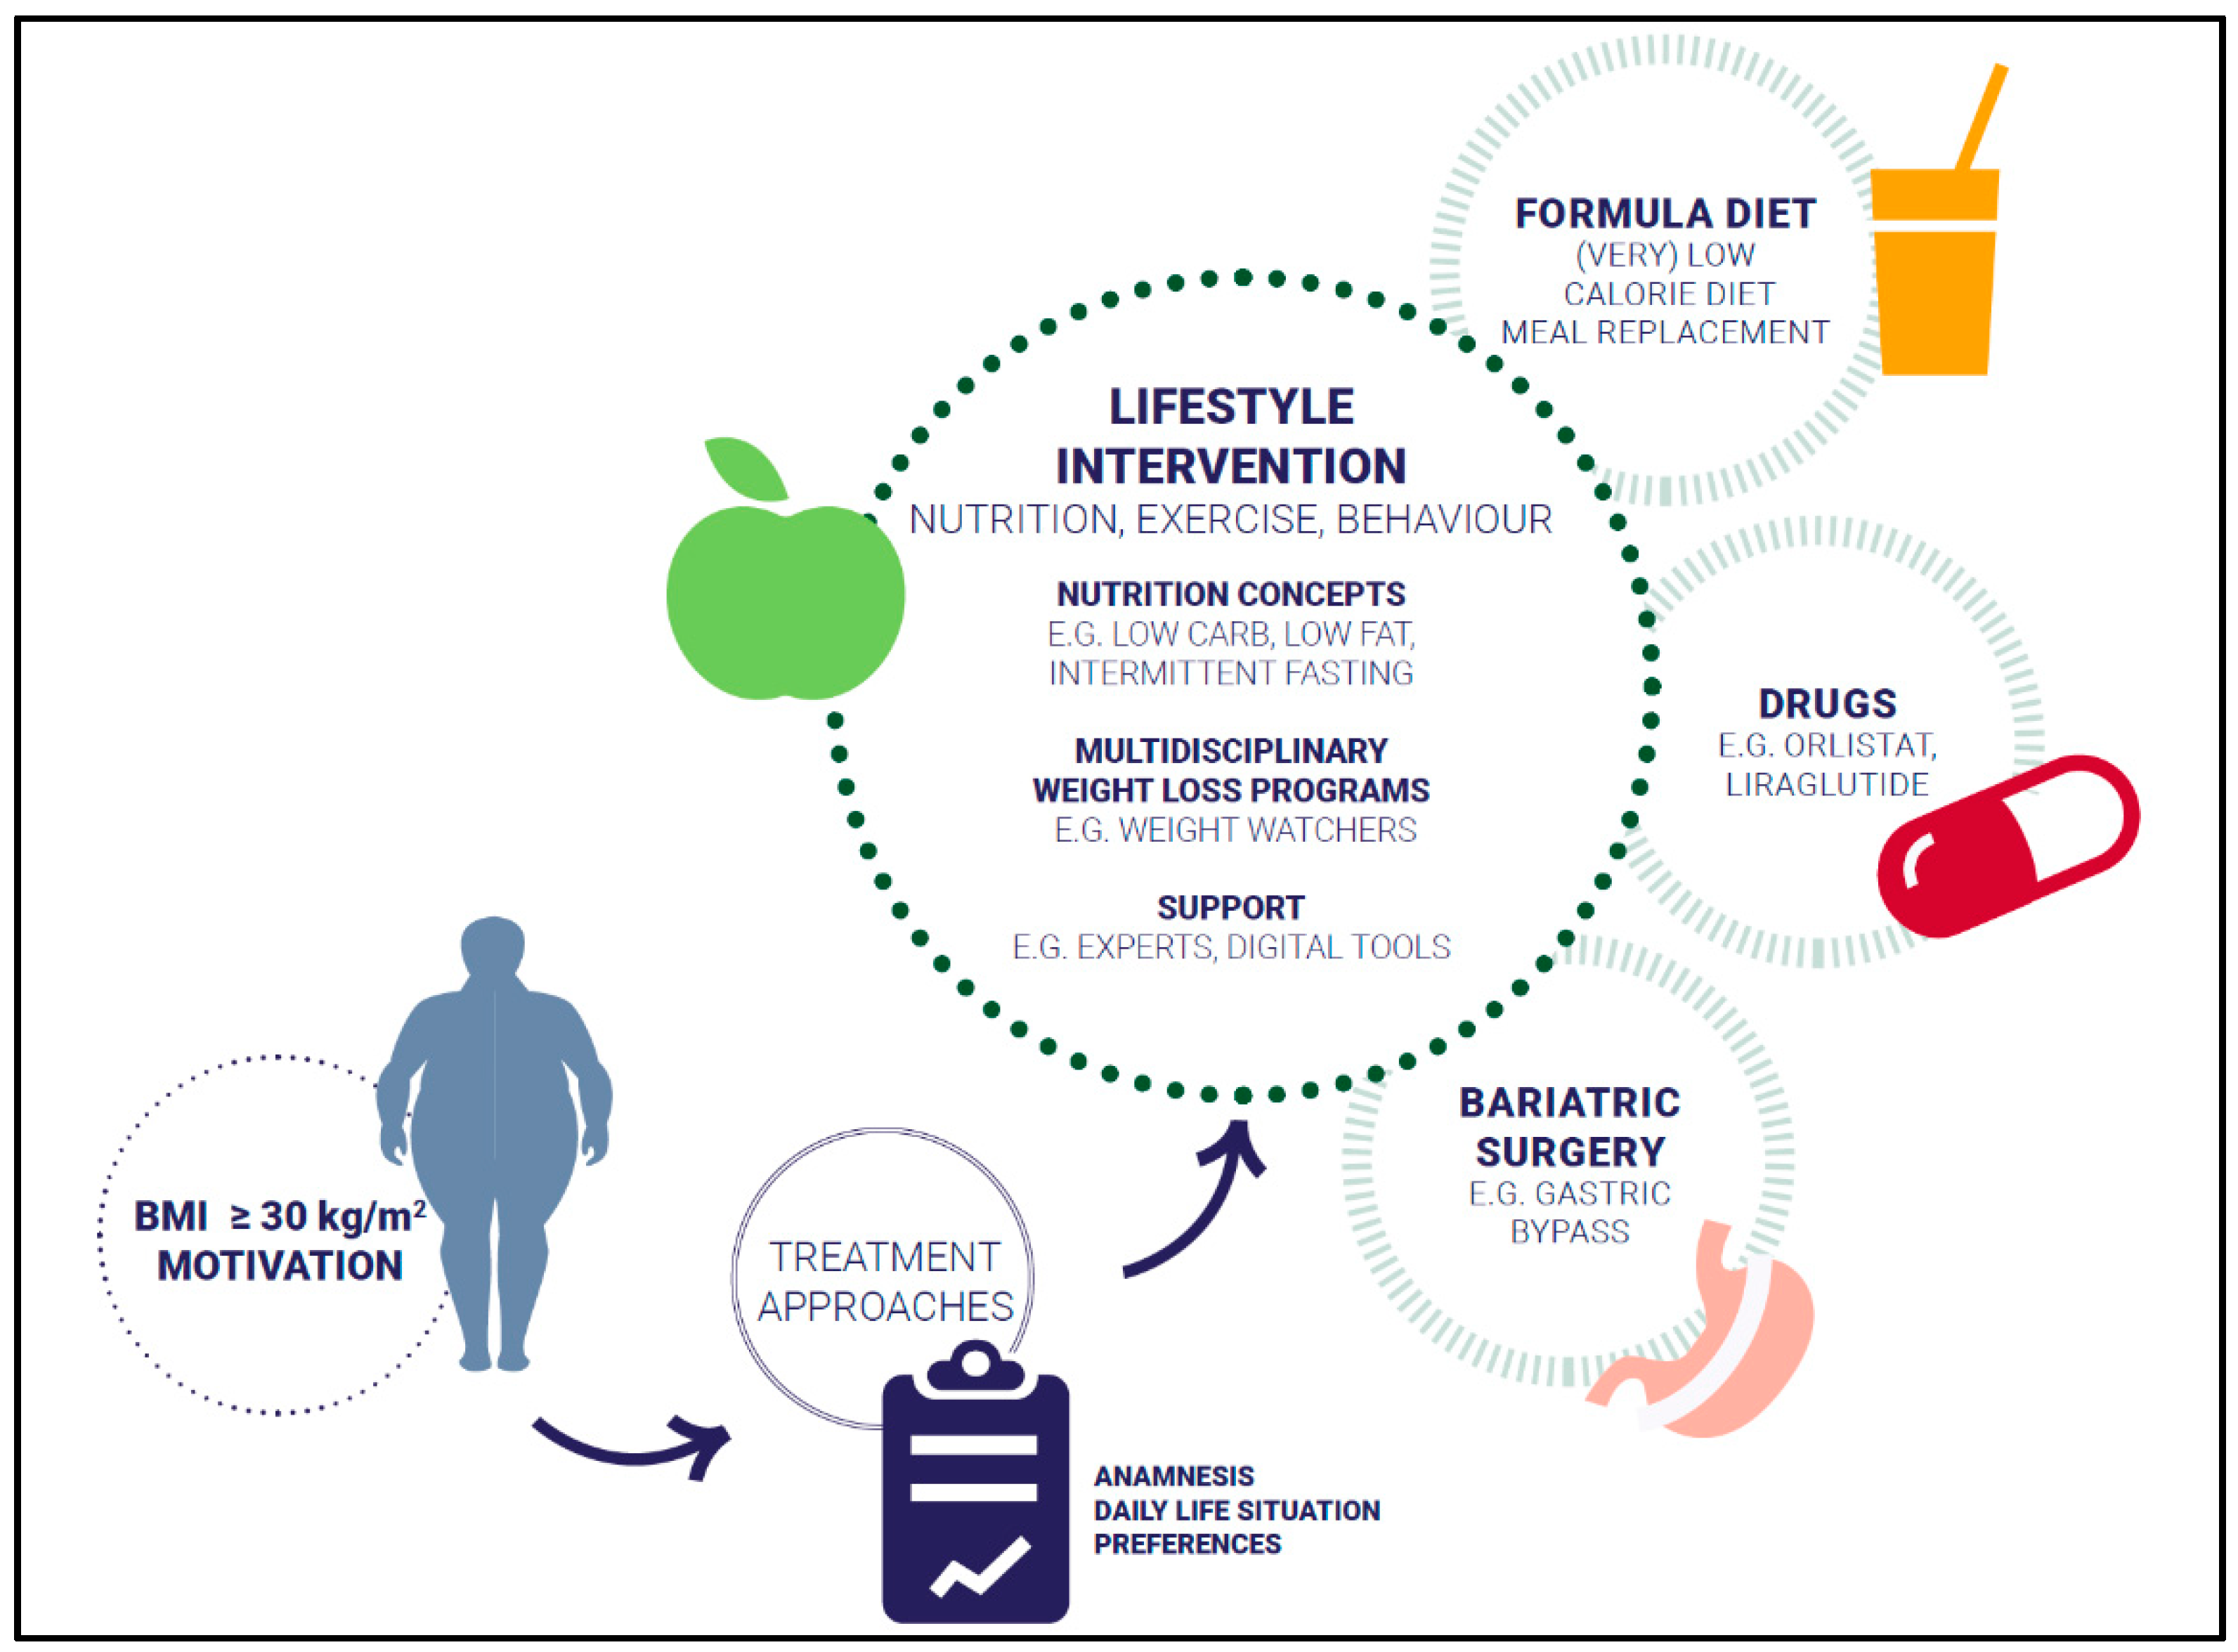 Obesity prevention programs for adults